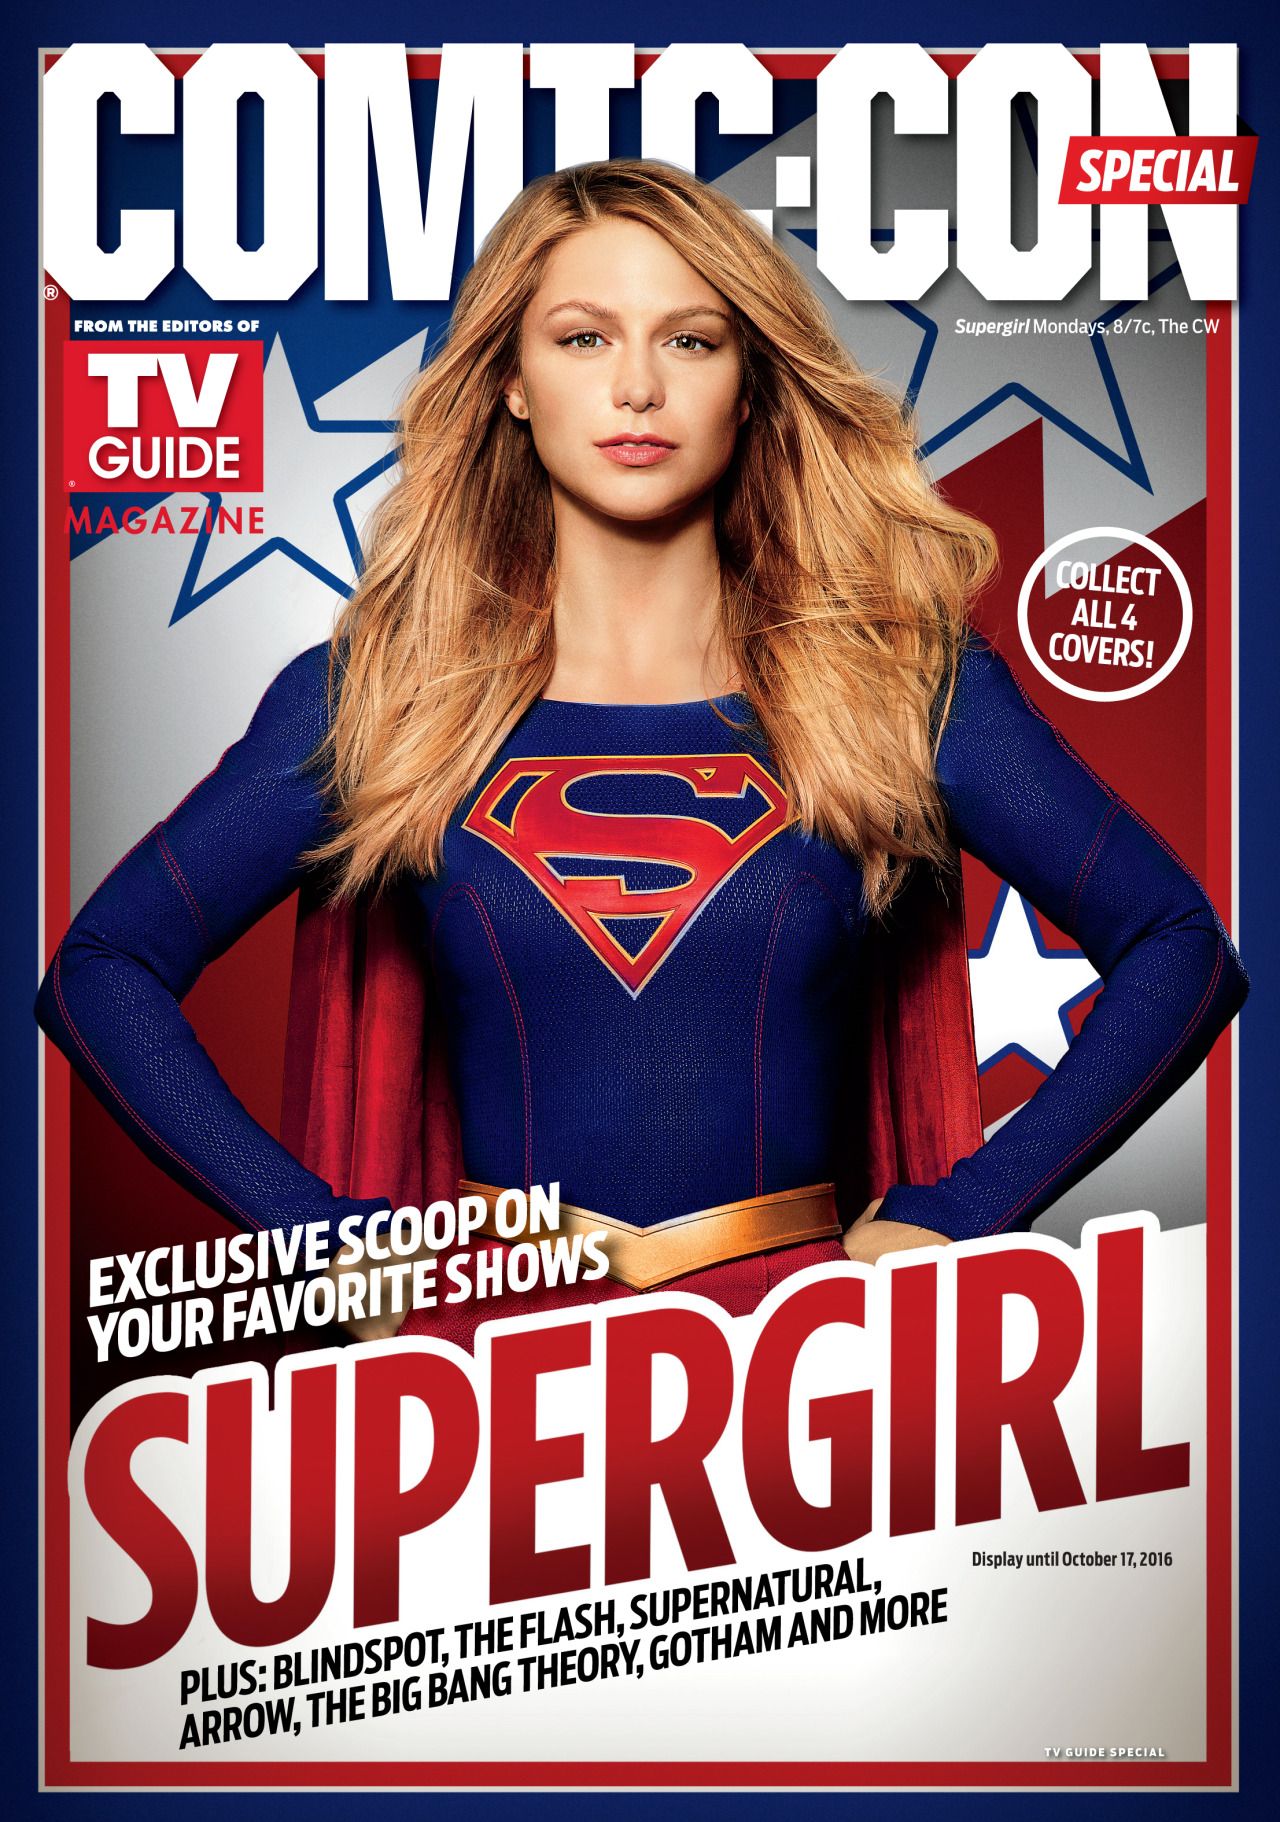 TV Guide&#039;s special SDCC magazine cover: Supergirl